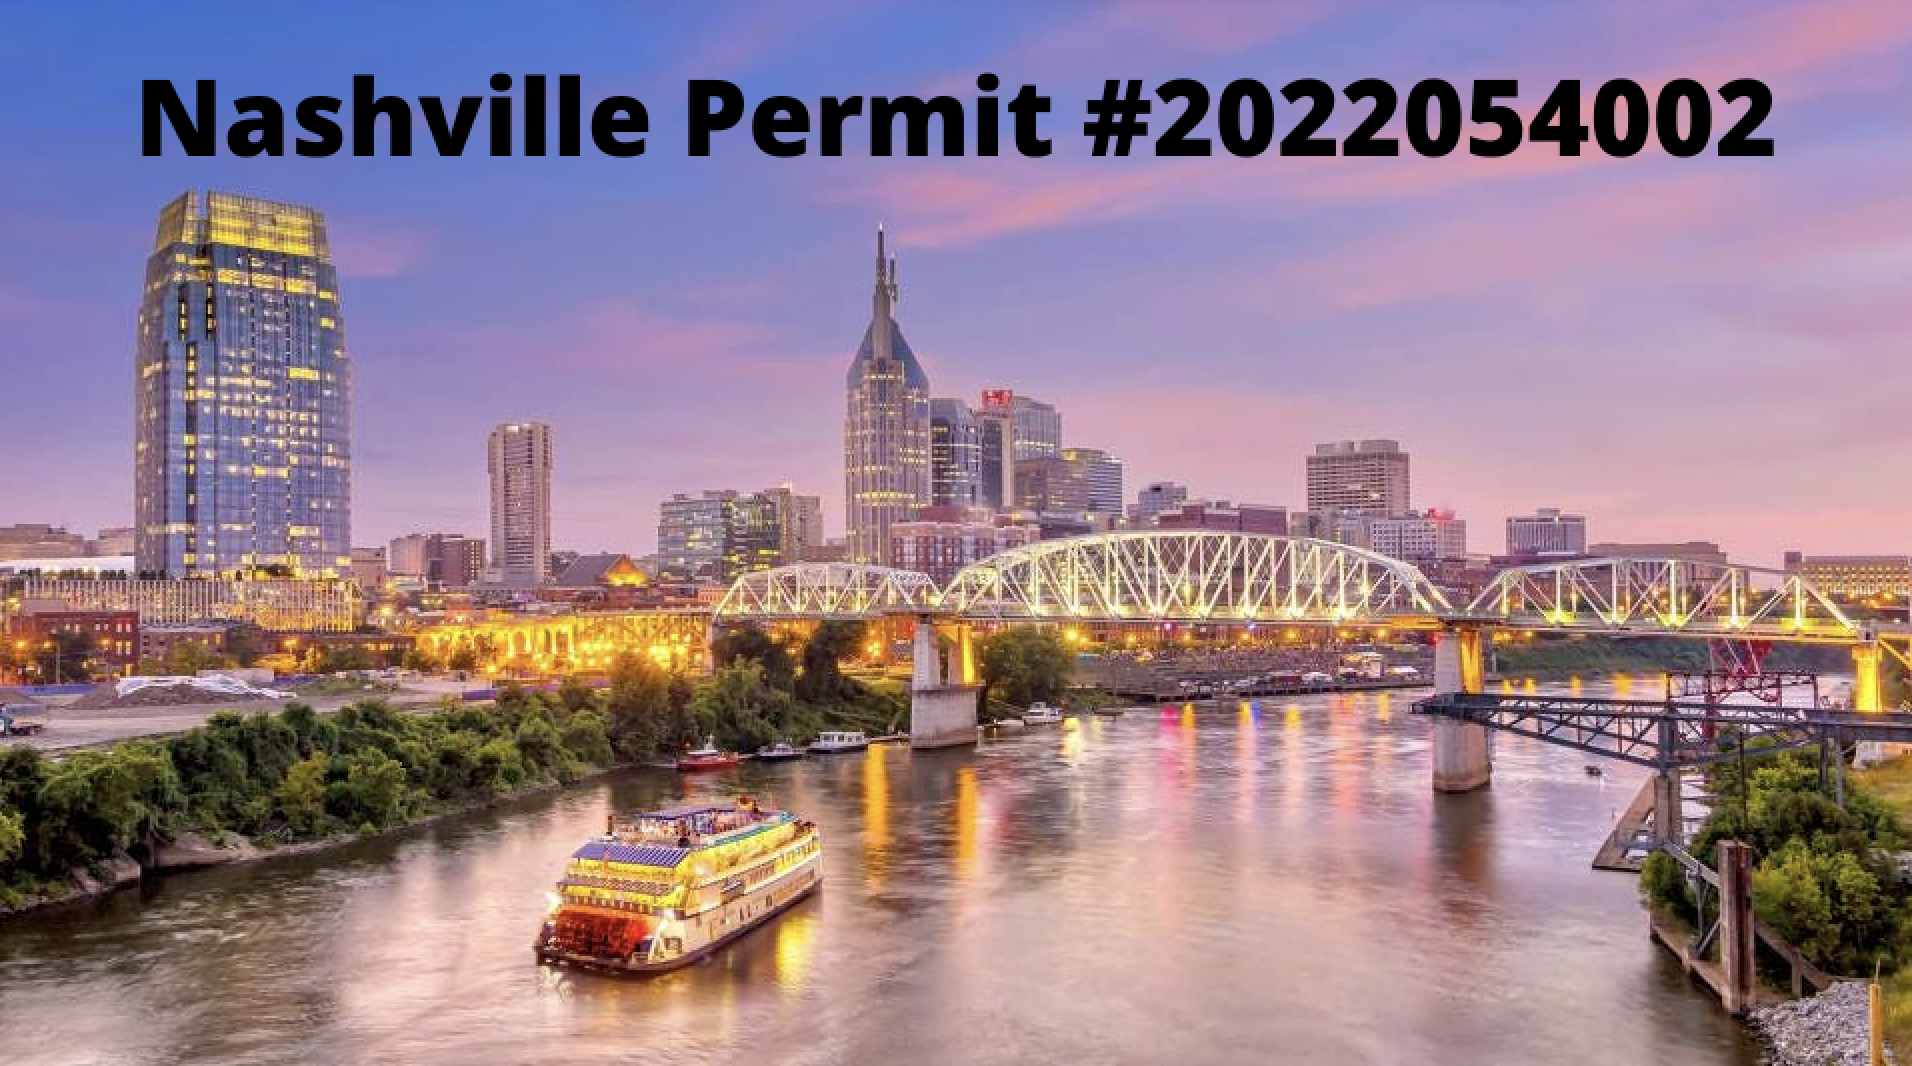 Nashville Permit issued in 2022 followed by:2022054002